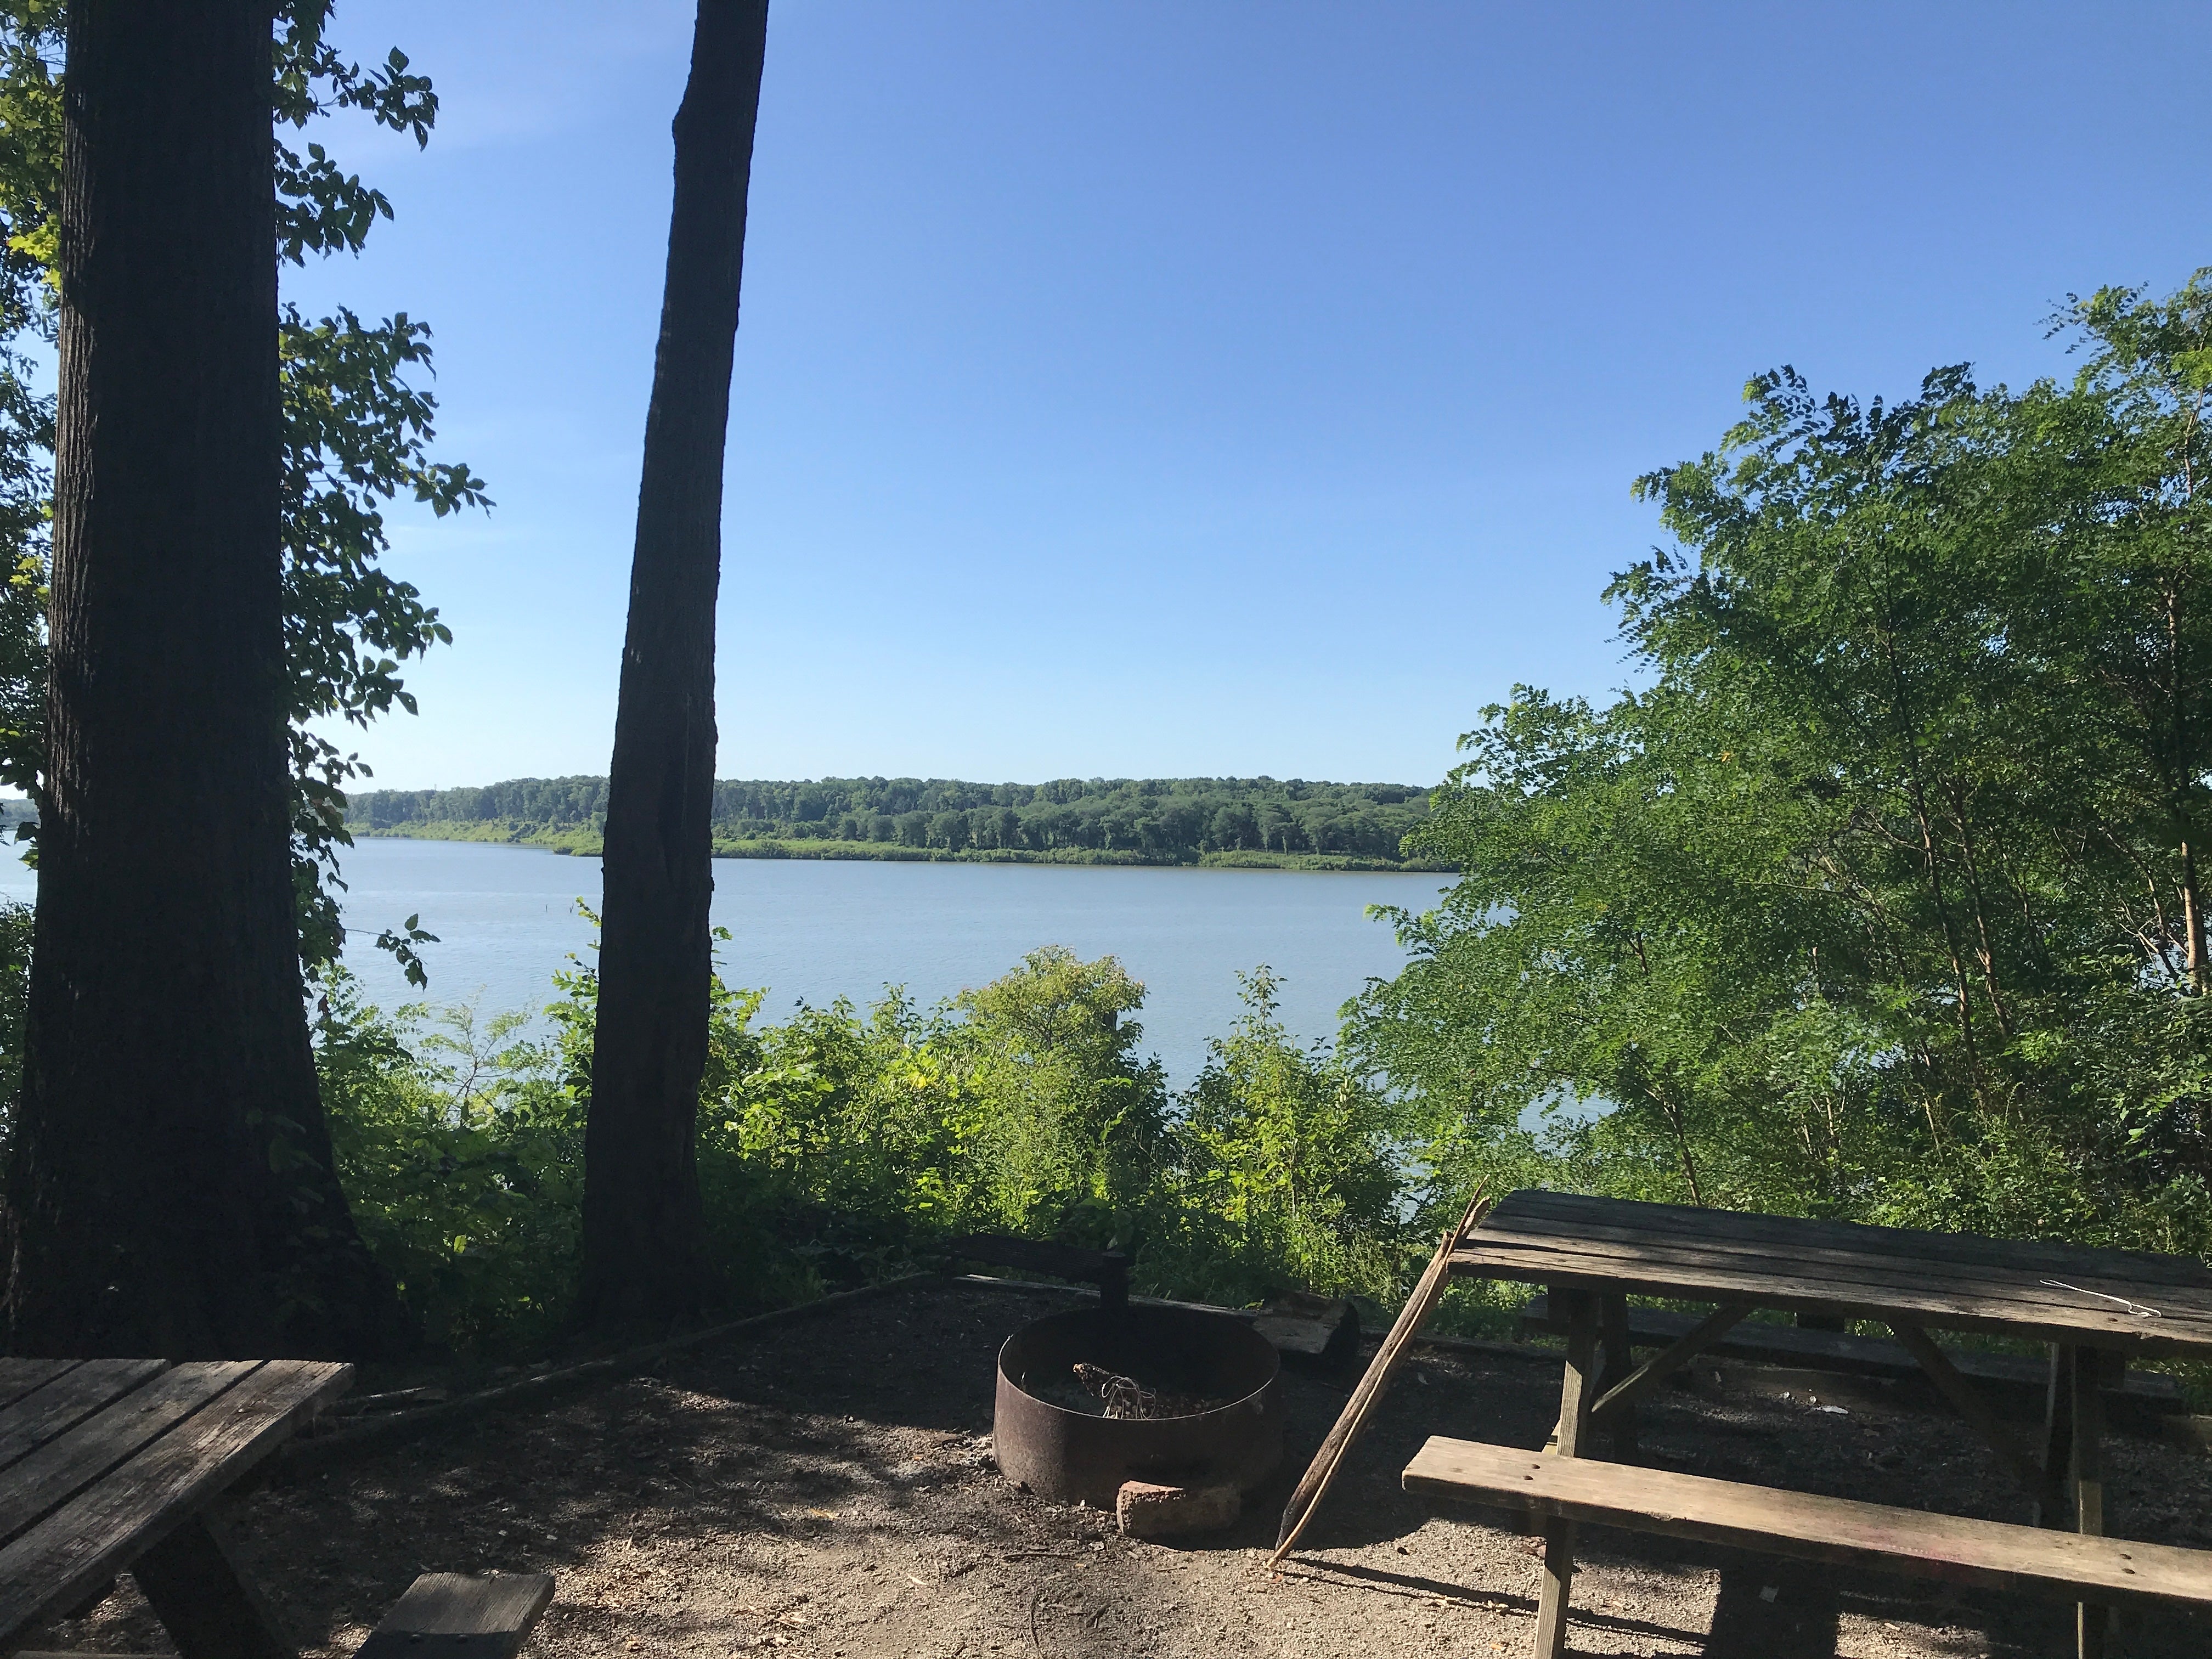 Camper submitted image from Kil-So-Quah - J. Edward Roush Lake - 2